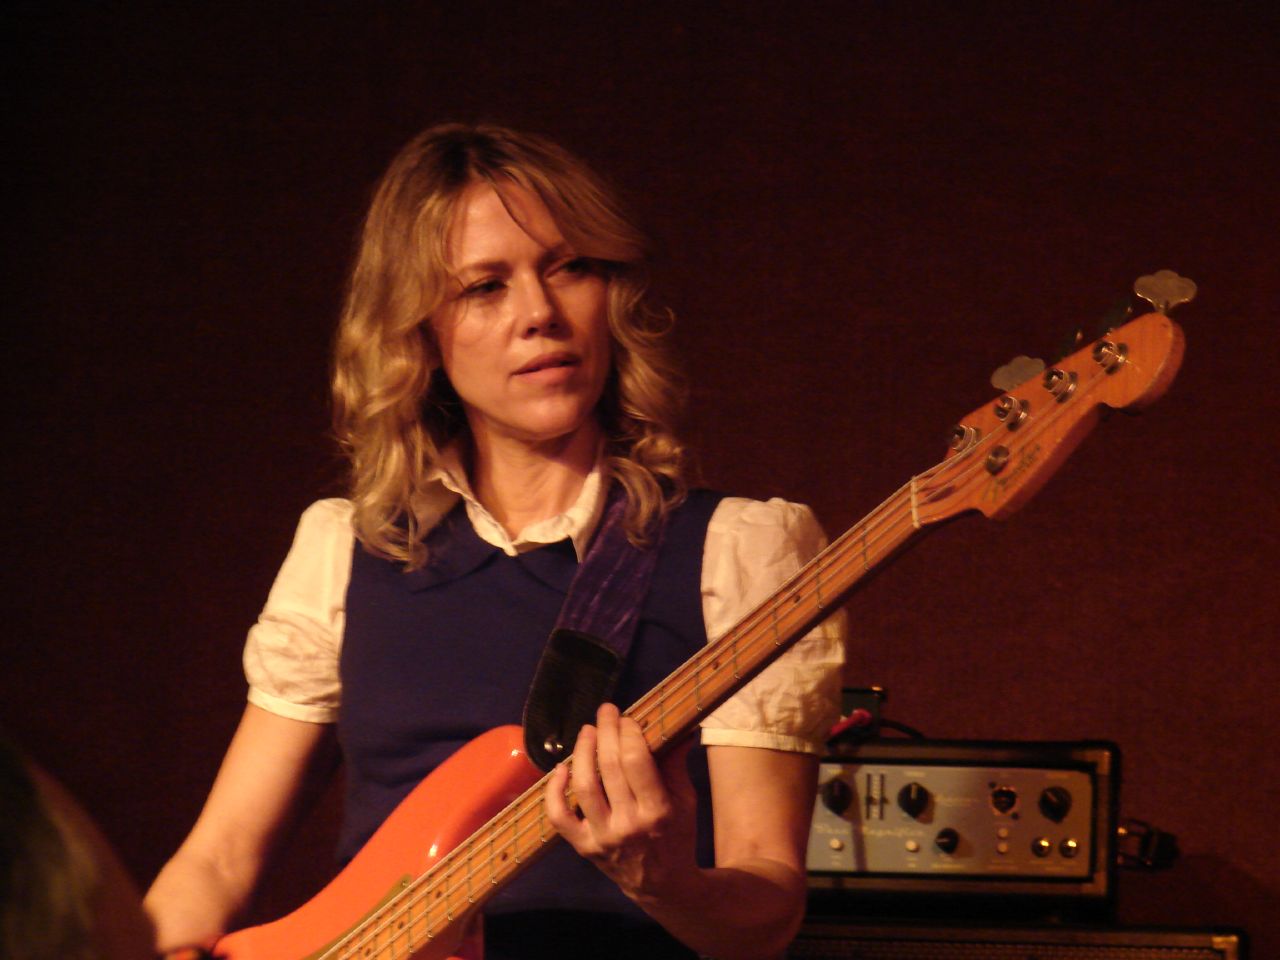 a woman with long hair holding an orange and yellow guitar